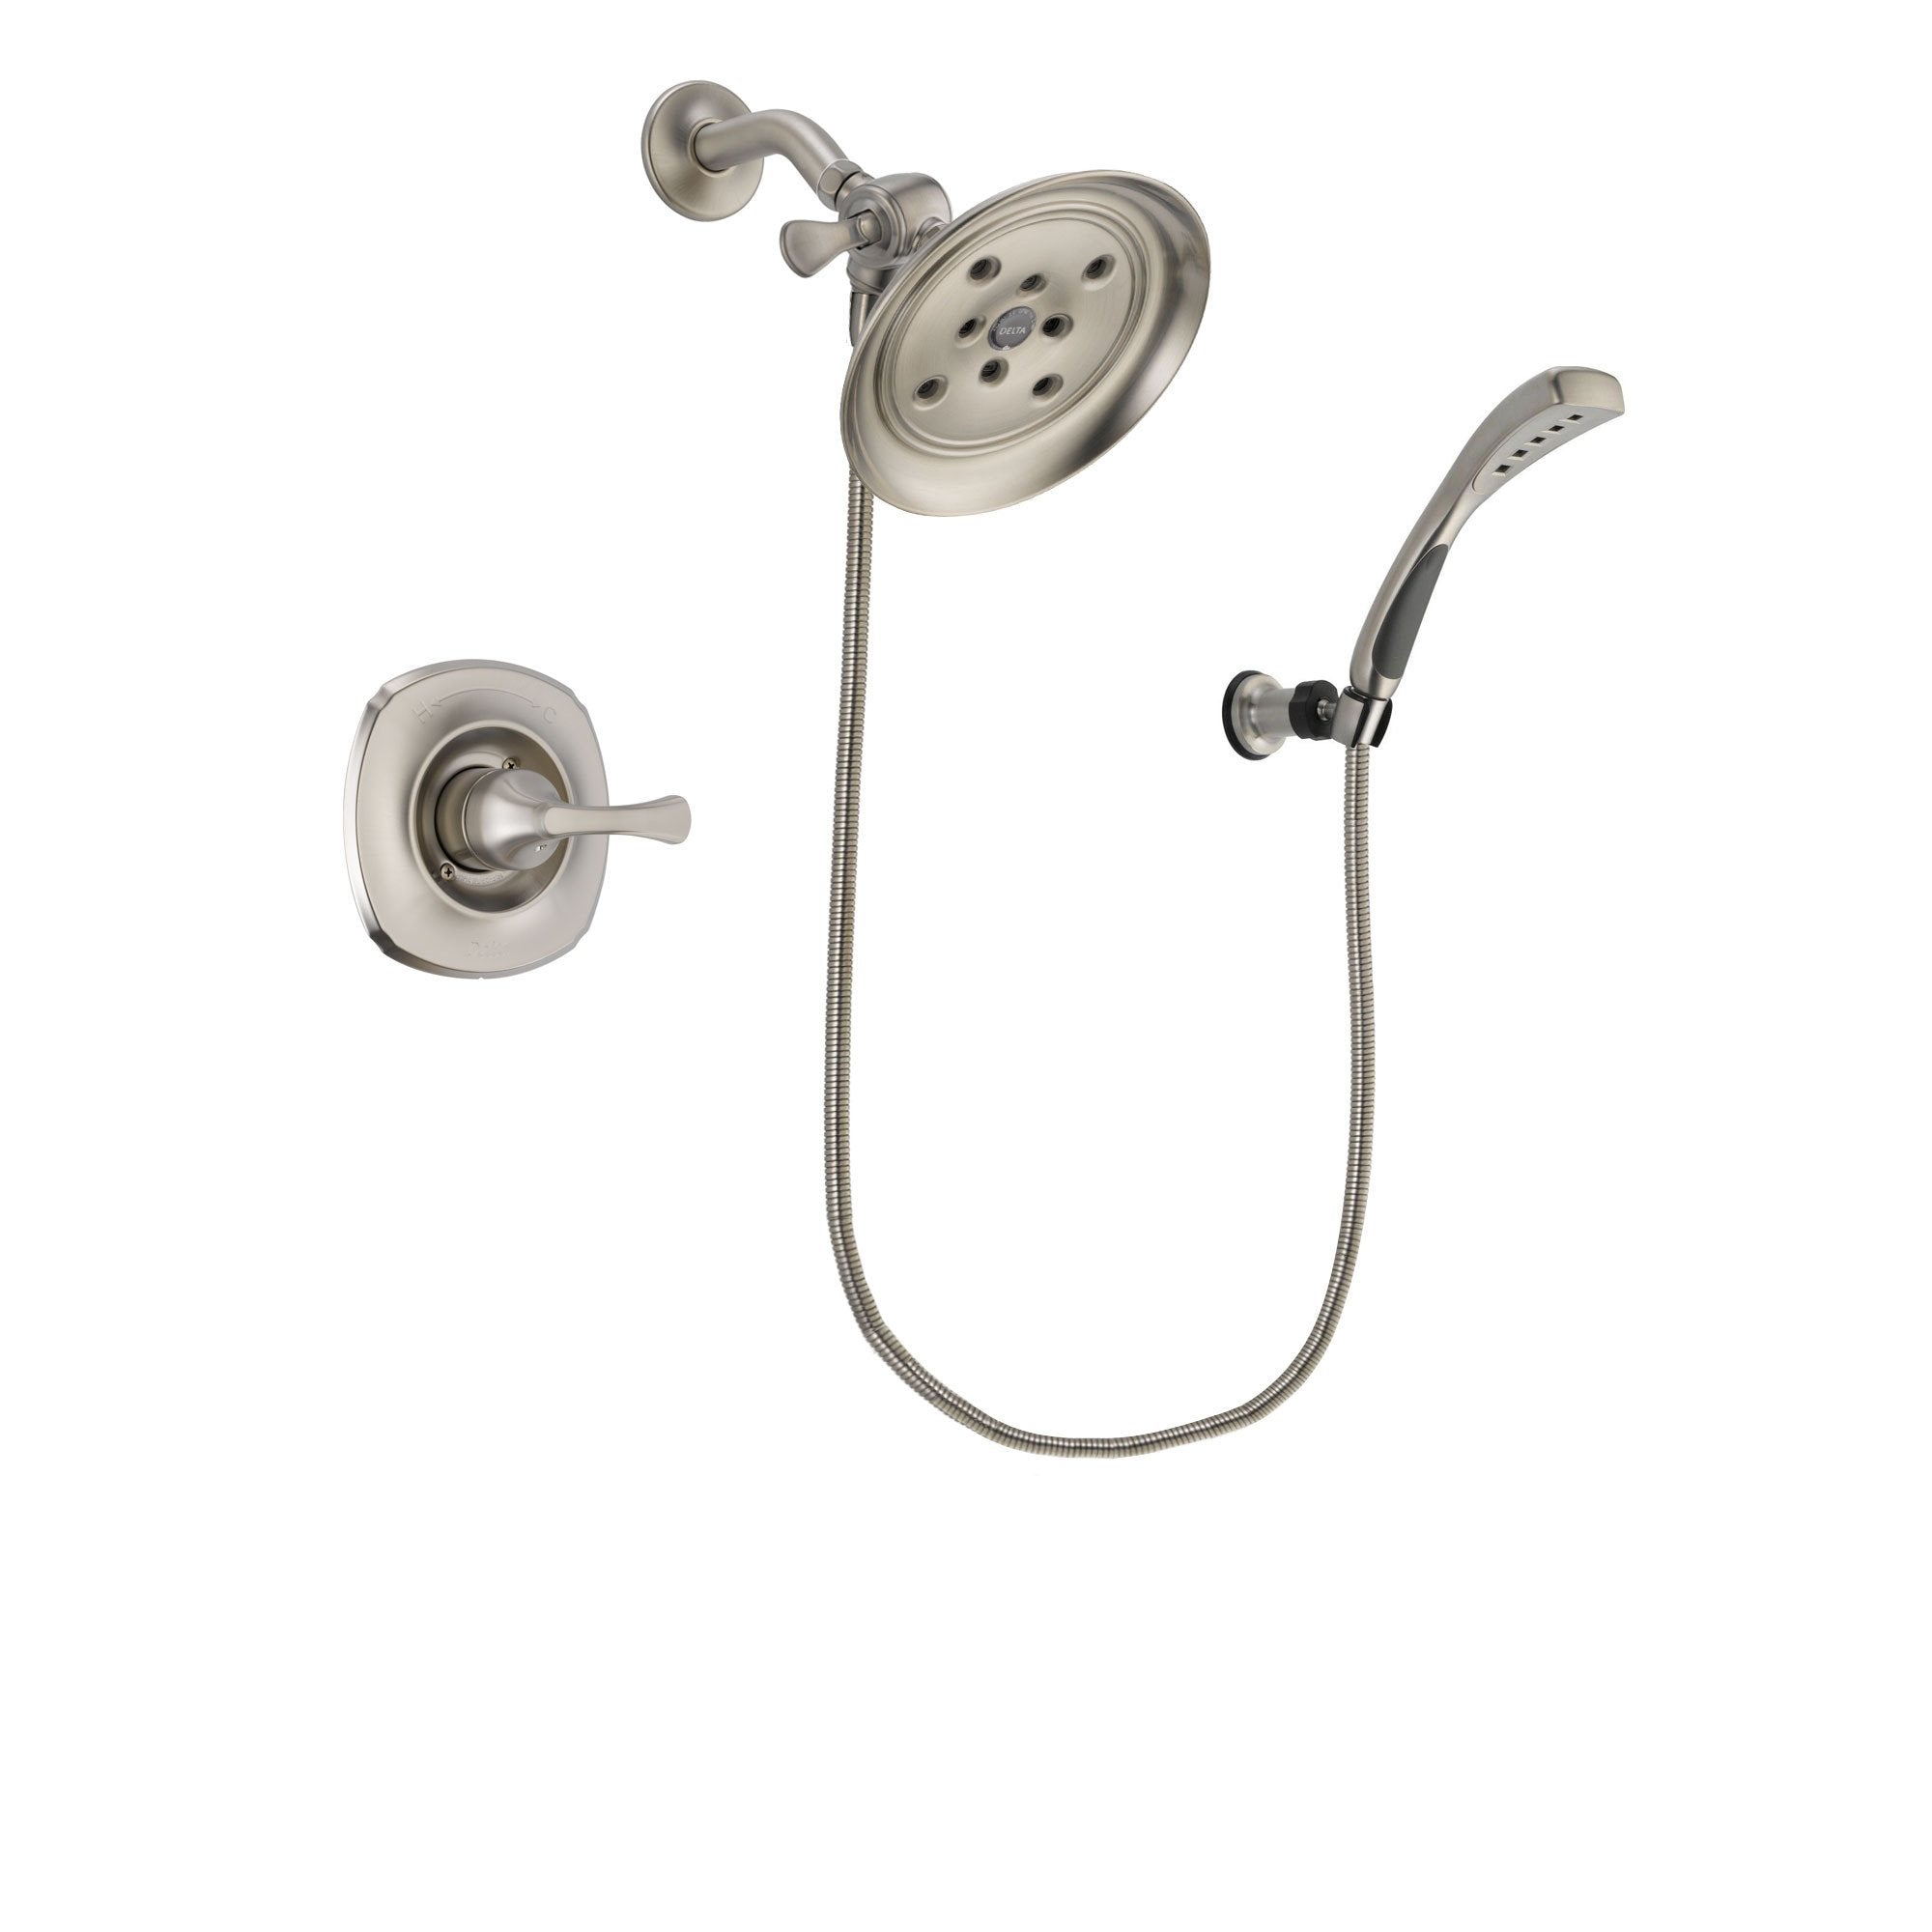 Delta Addison Stainless Steel Finish Shower Faucet System Package with Large Rain Showerhead and Wall Mounted Handshower Includes Rough-in Valve DSP1870V